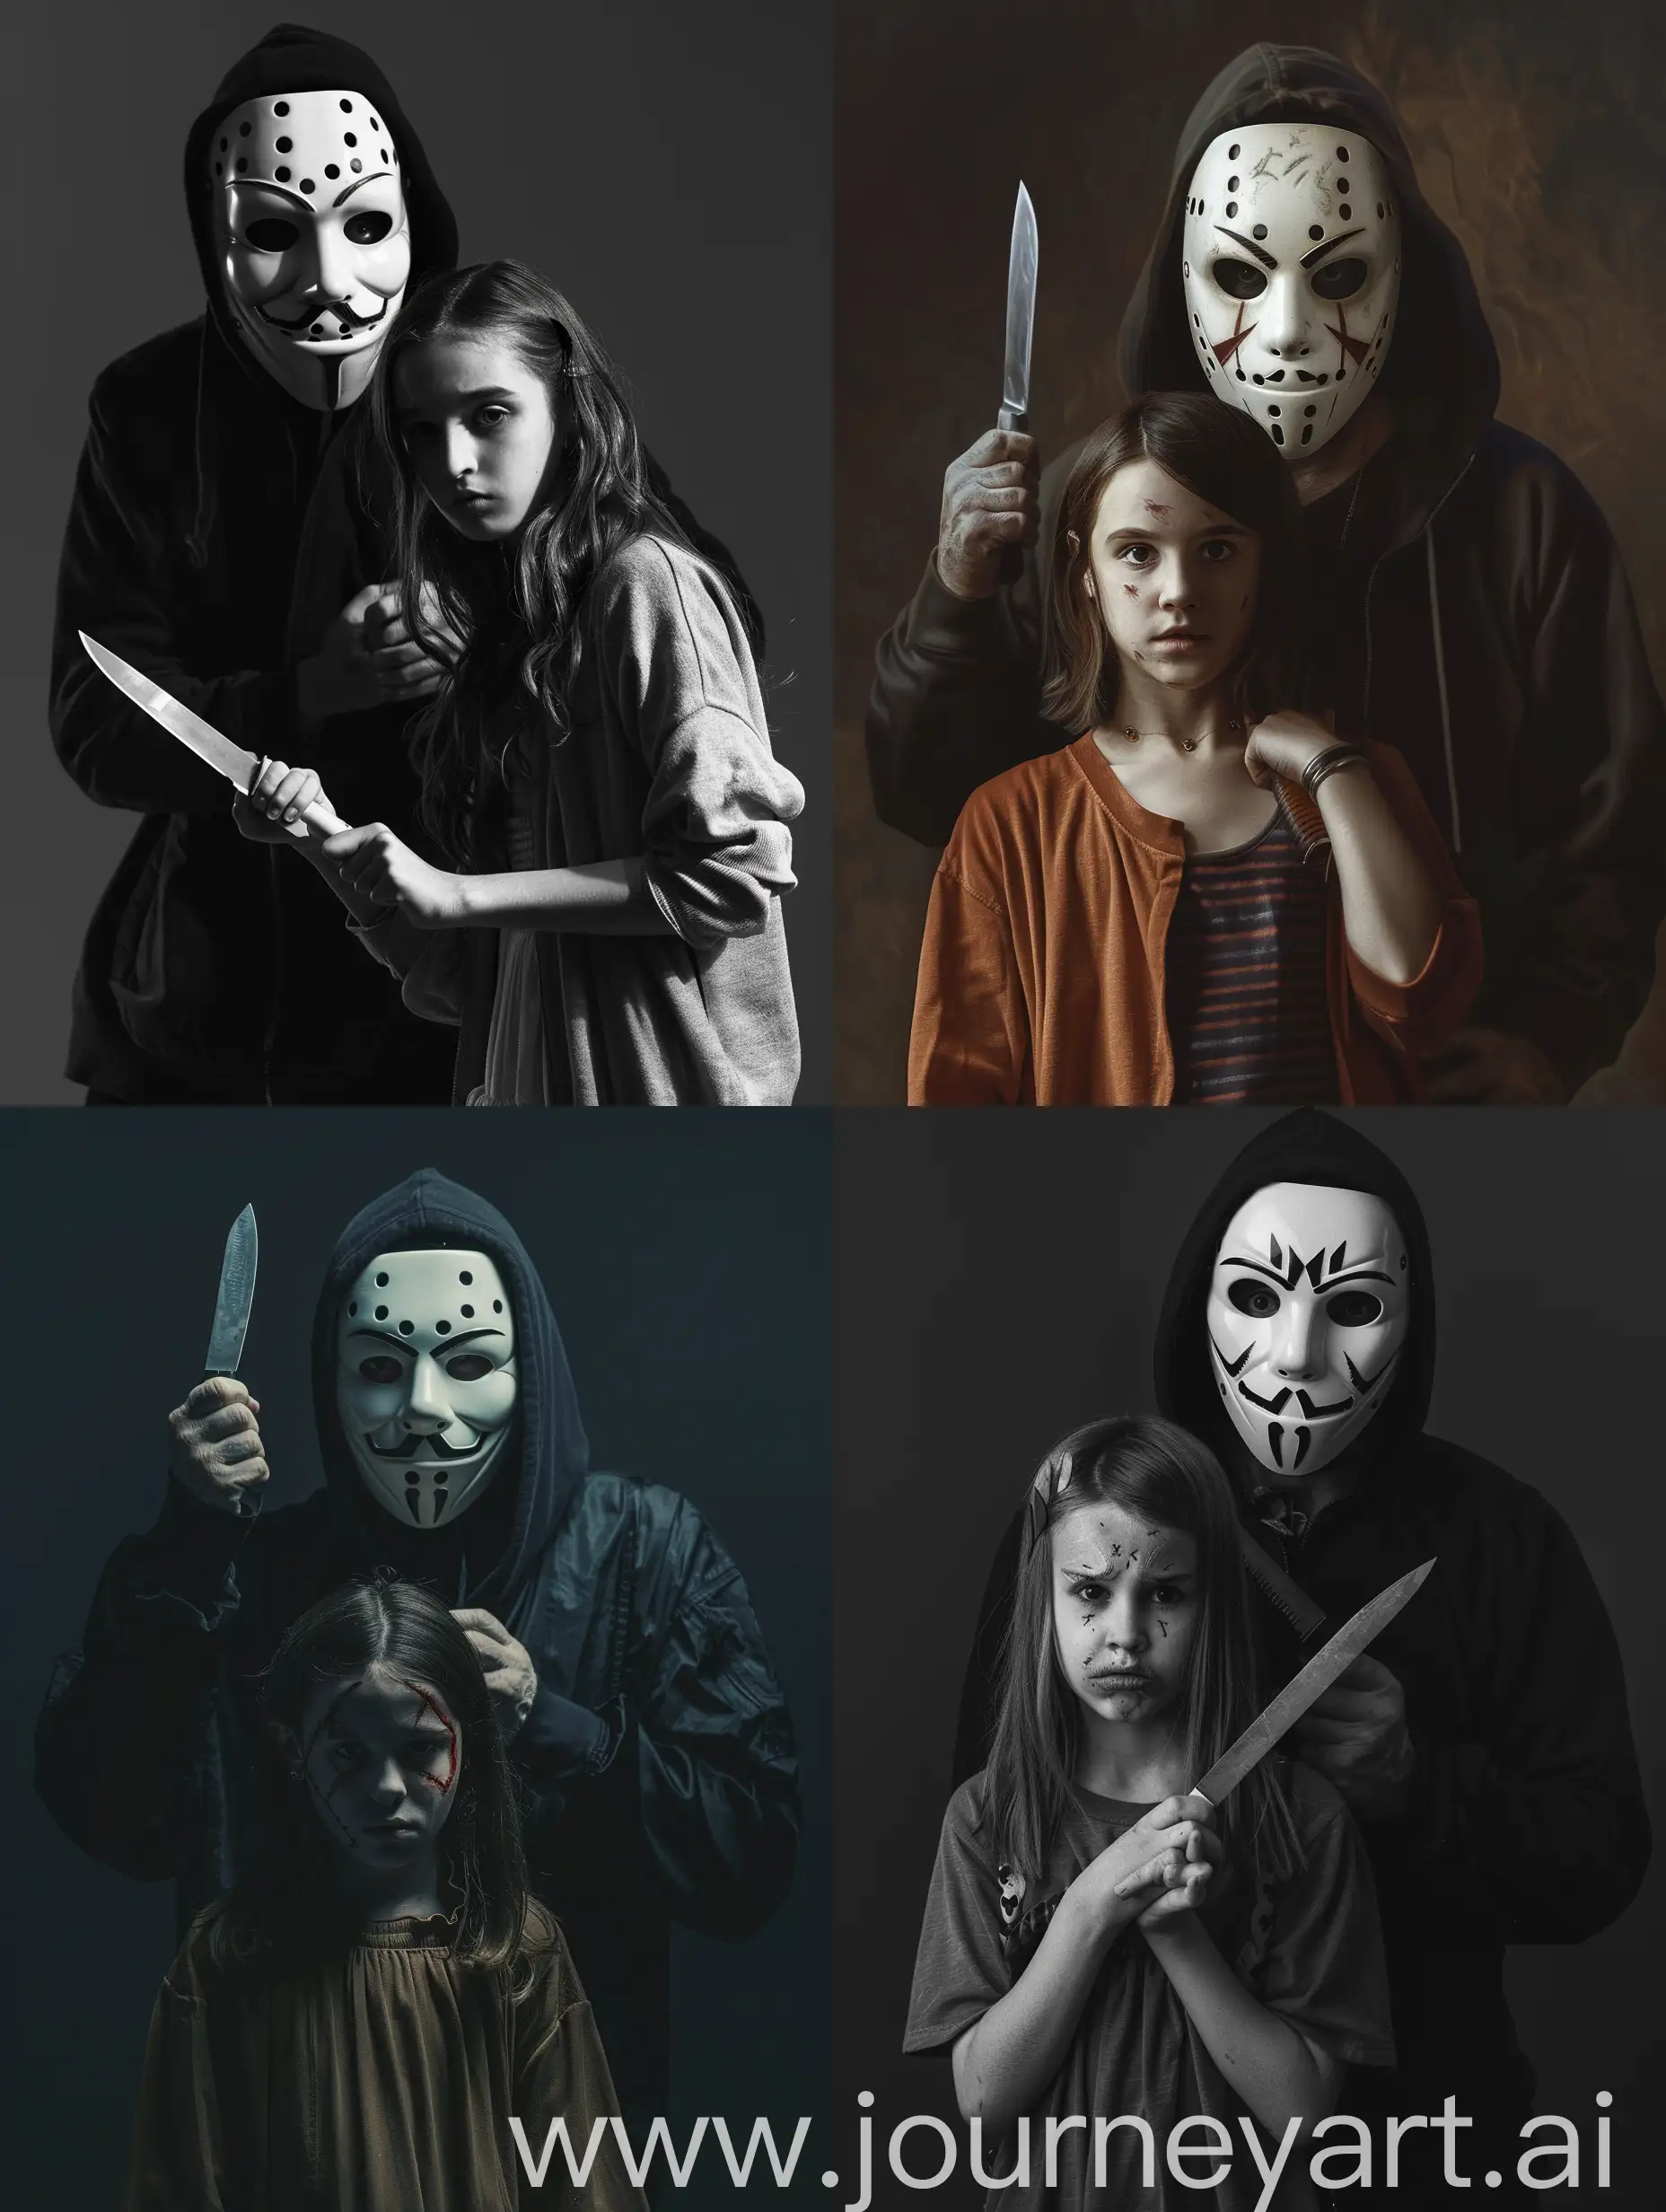 The killer in the Scream mask holds a knife in his hand, standing behind a young girl, her prototype is actress Zoey Deutsch, realism, cinematic style